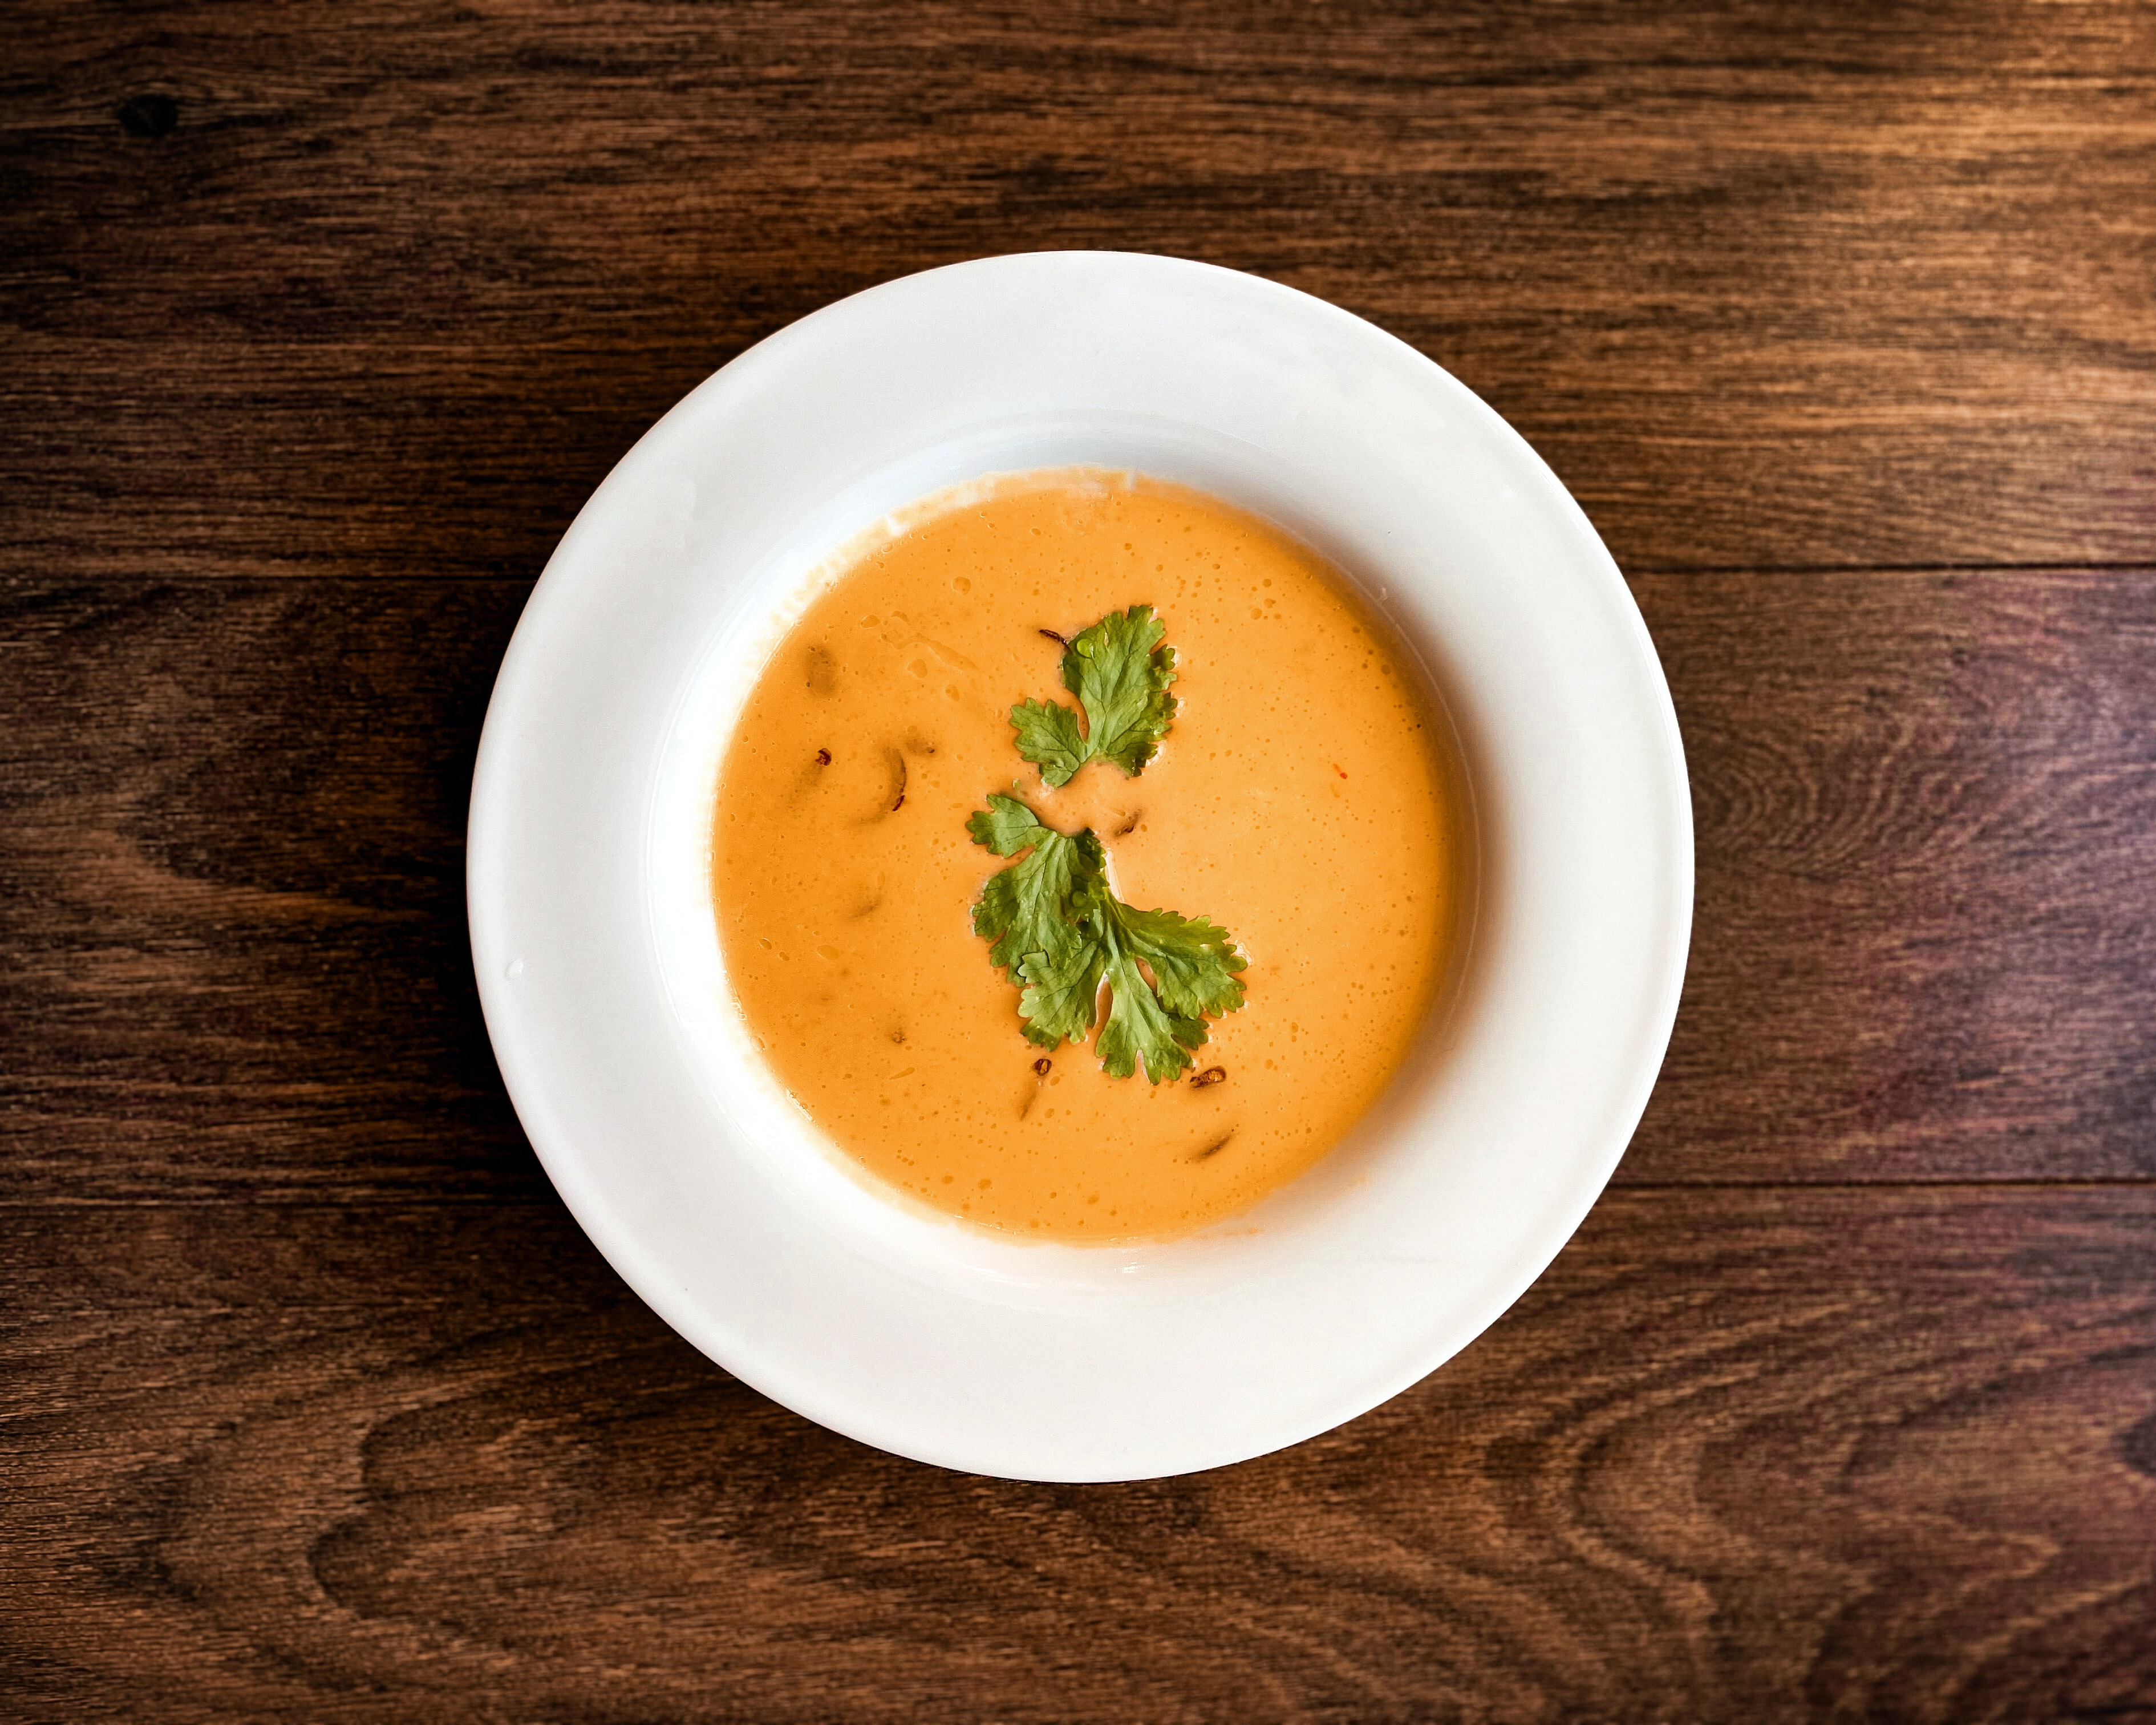 Alt: A dish of butternut squash soup, on a wooden table. Image courtesy of Unsplash, by Jezebel Rose.